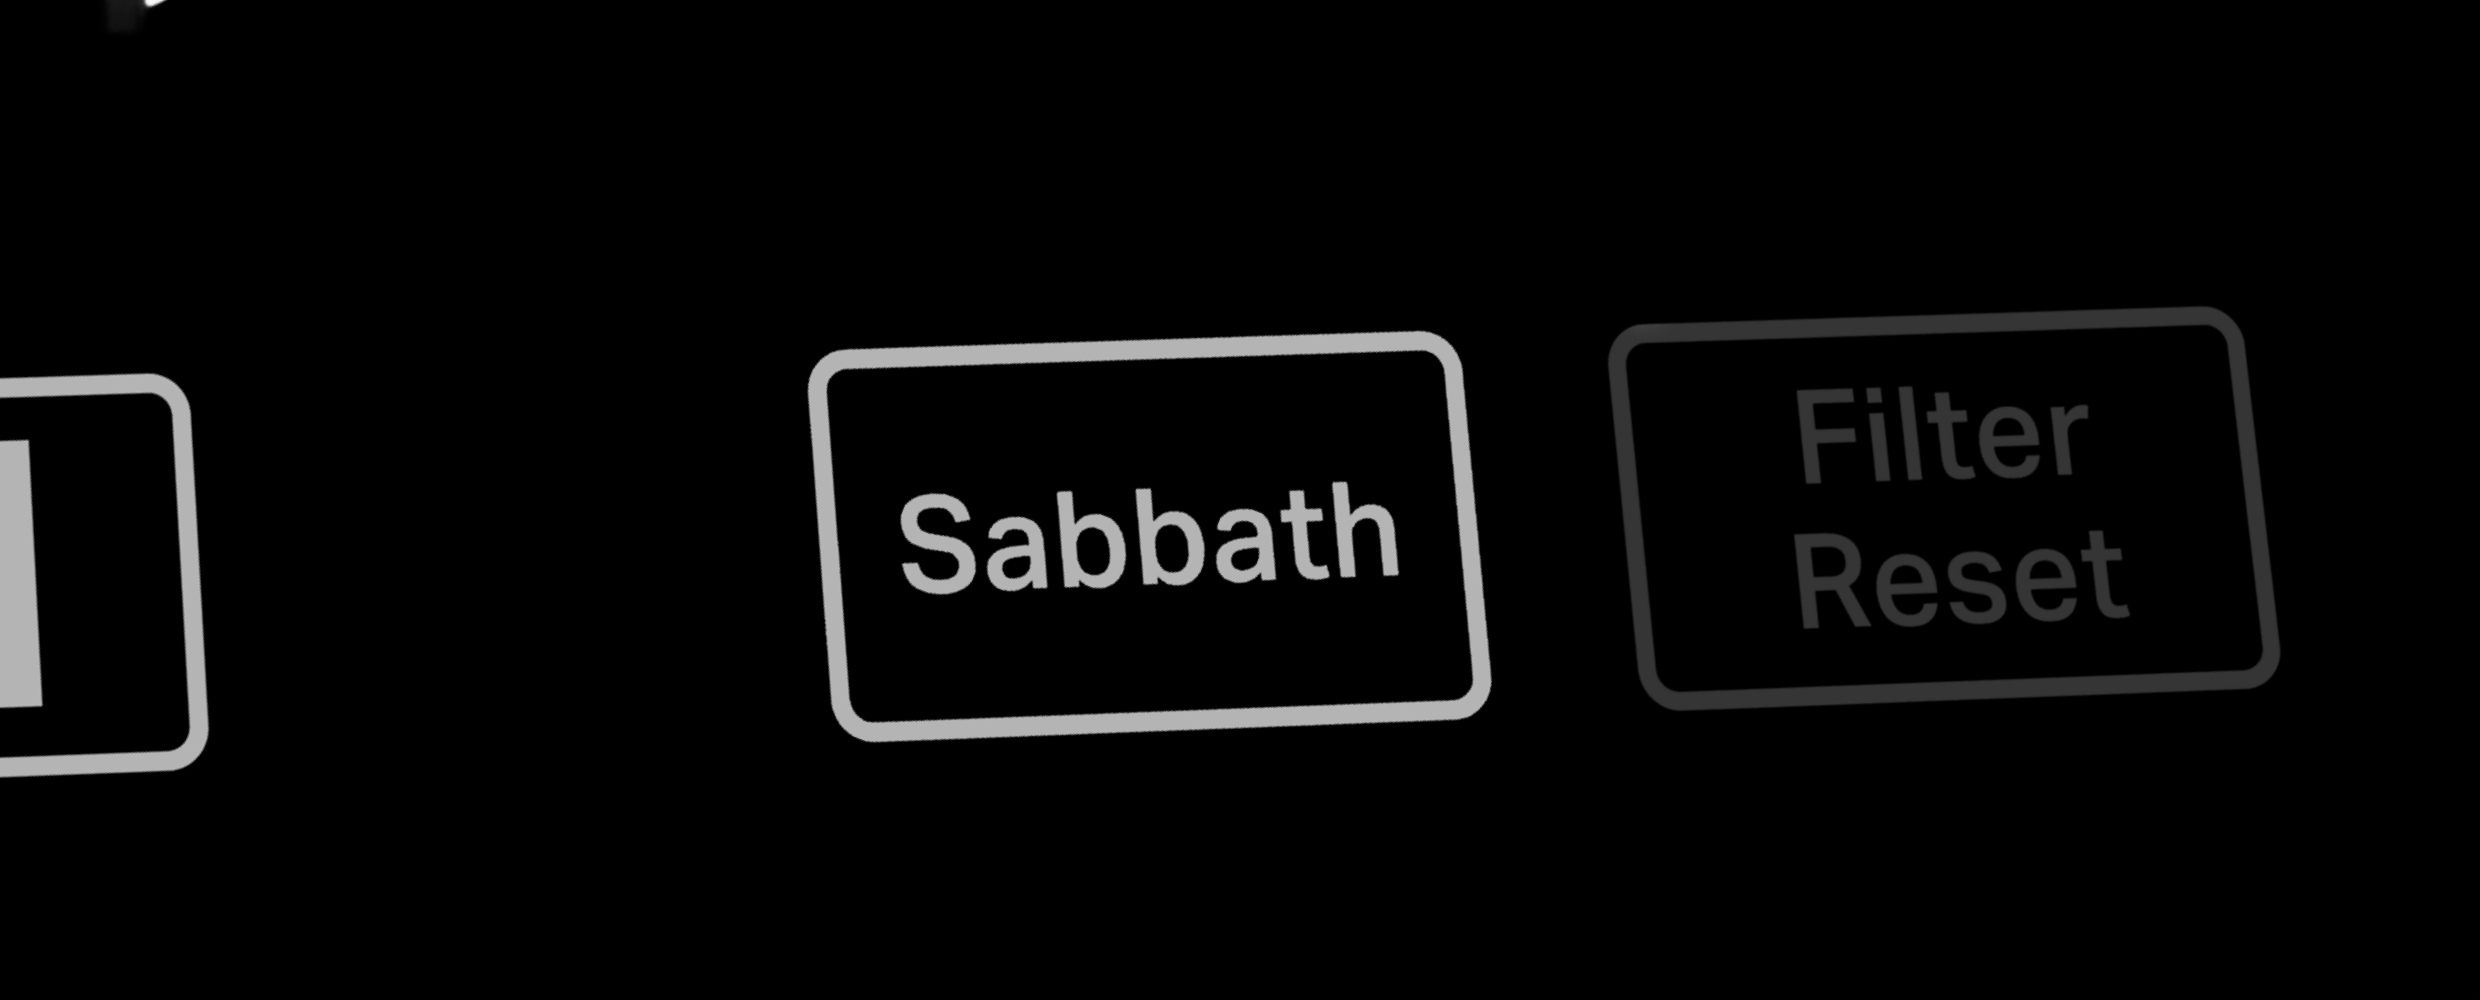 Sabbath button on Internal Touchscreen Controls on the 48" KitchenAid® Built-In Side-by-Side Refrigerator